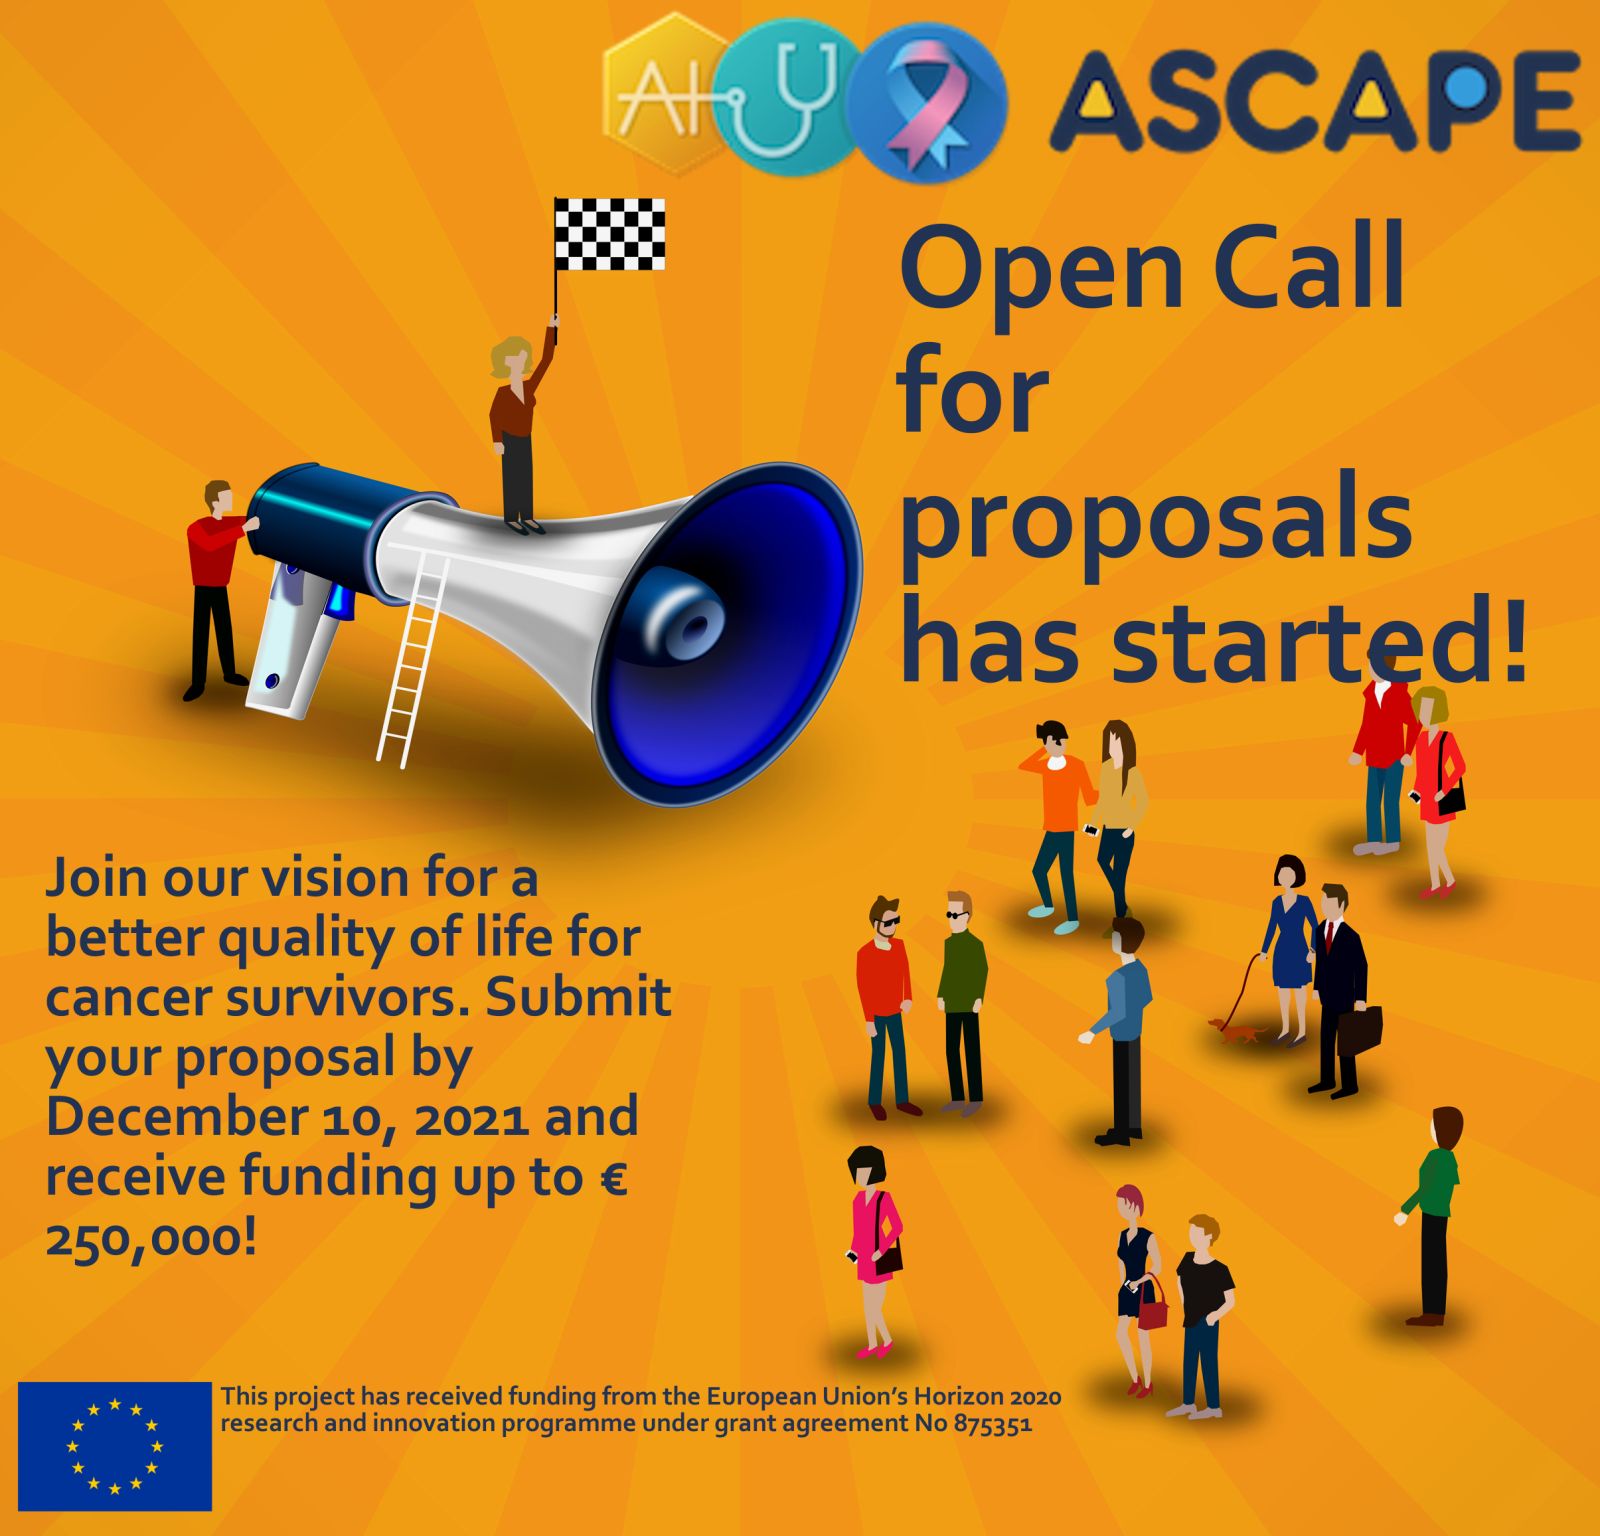 ASCAPE launches its Open Call for external proposals to join fight against cancer